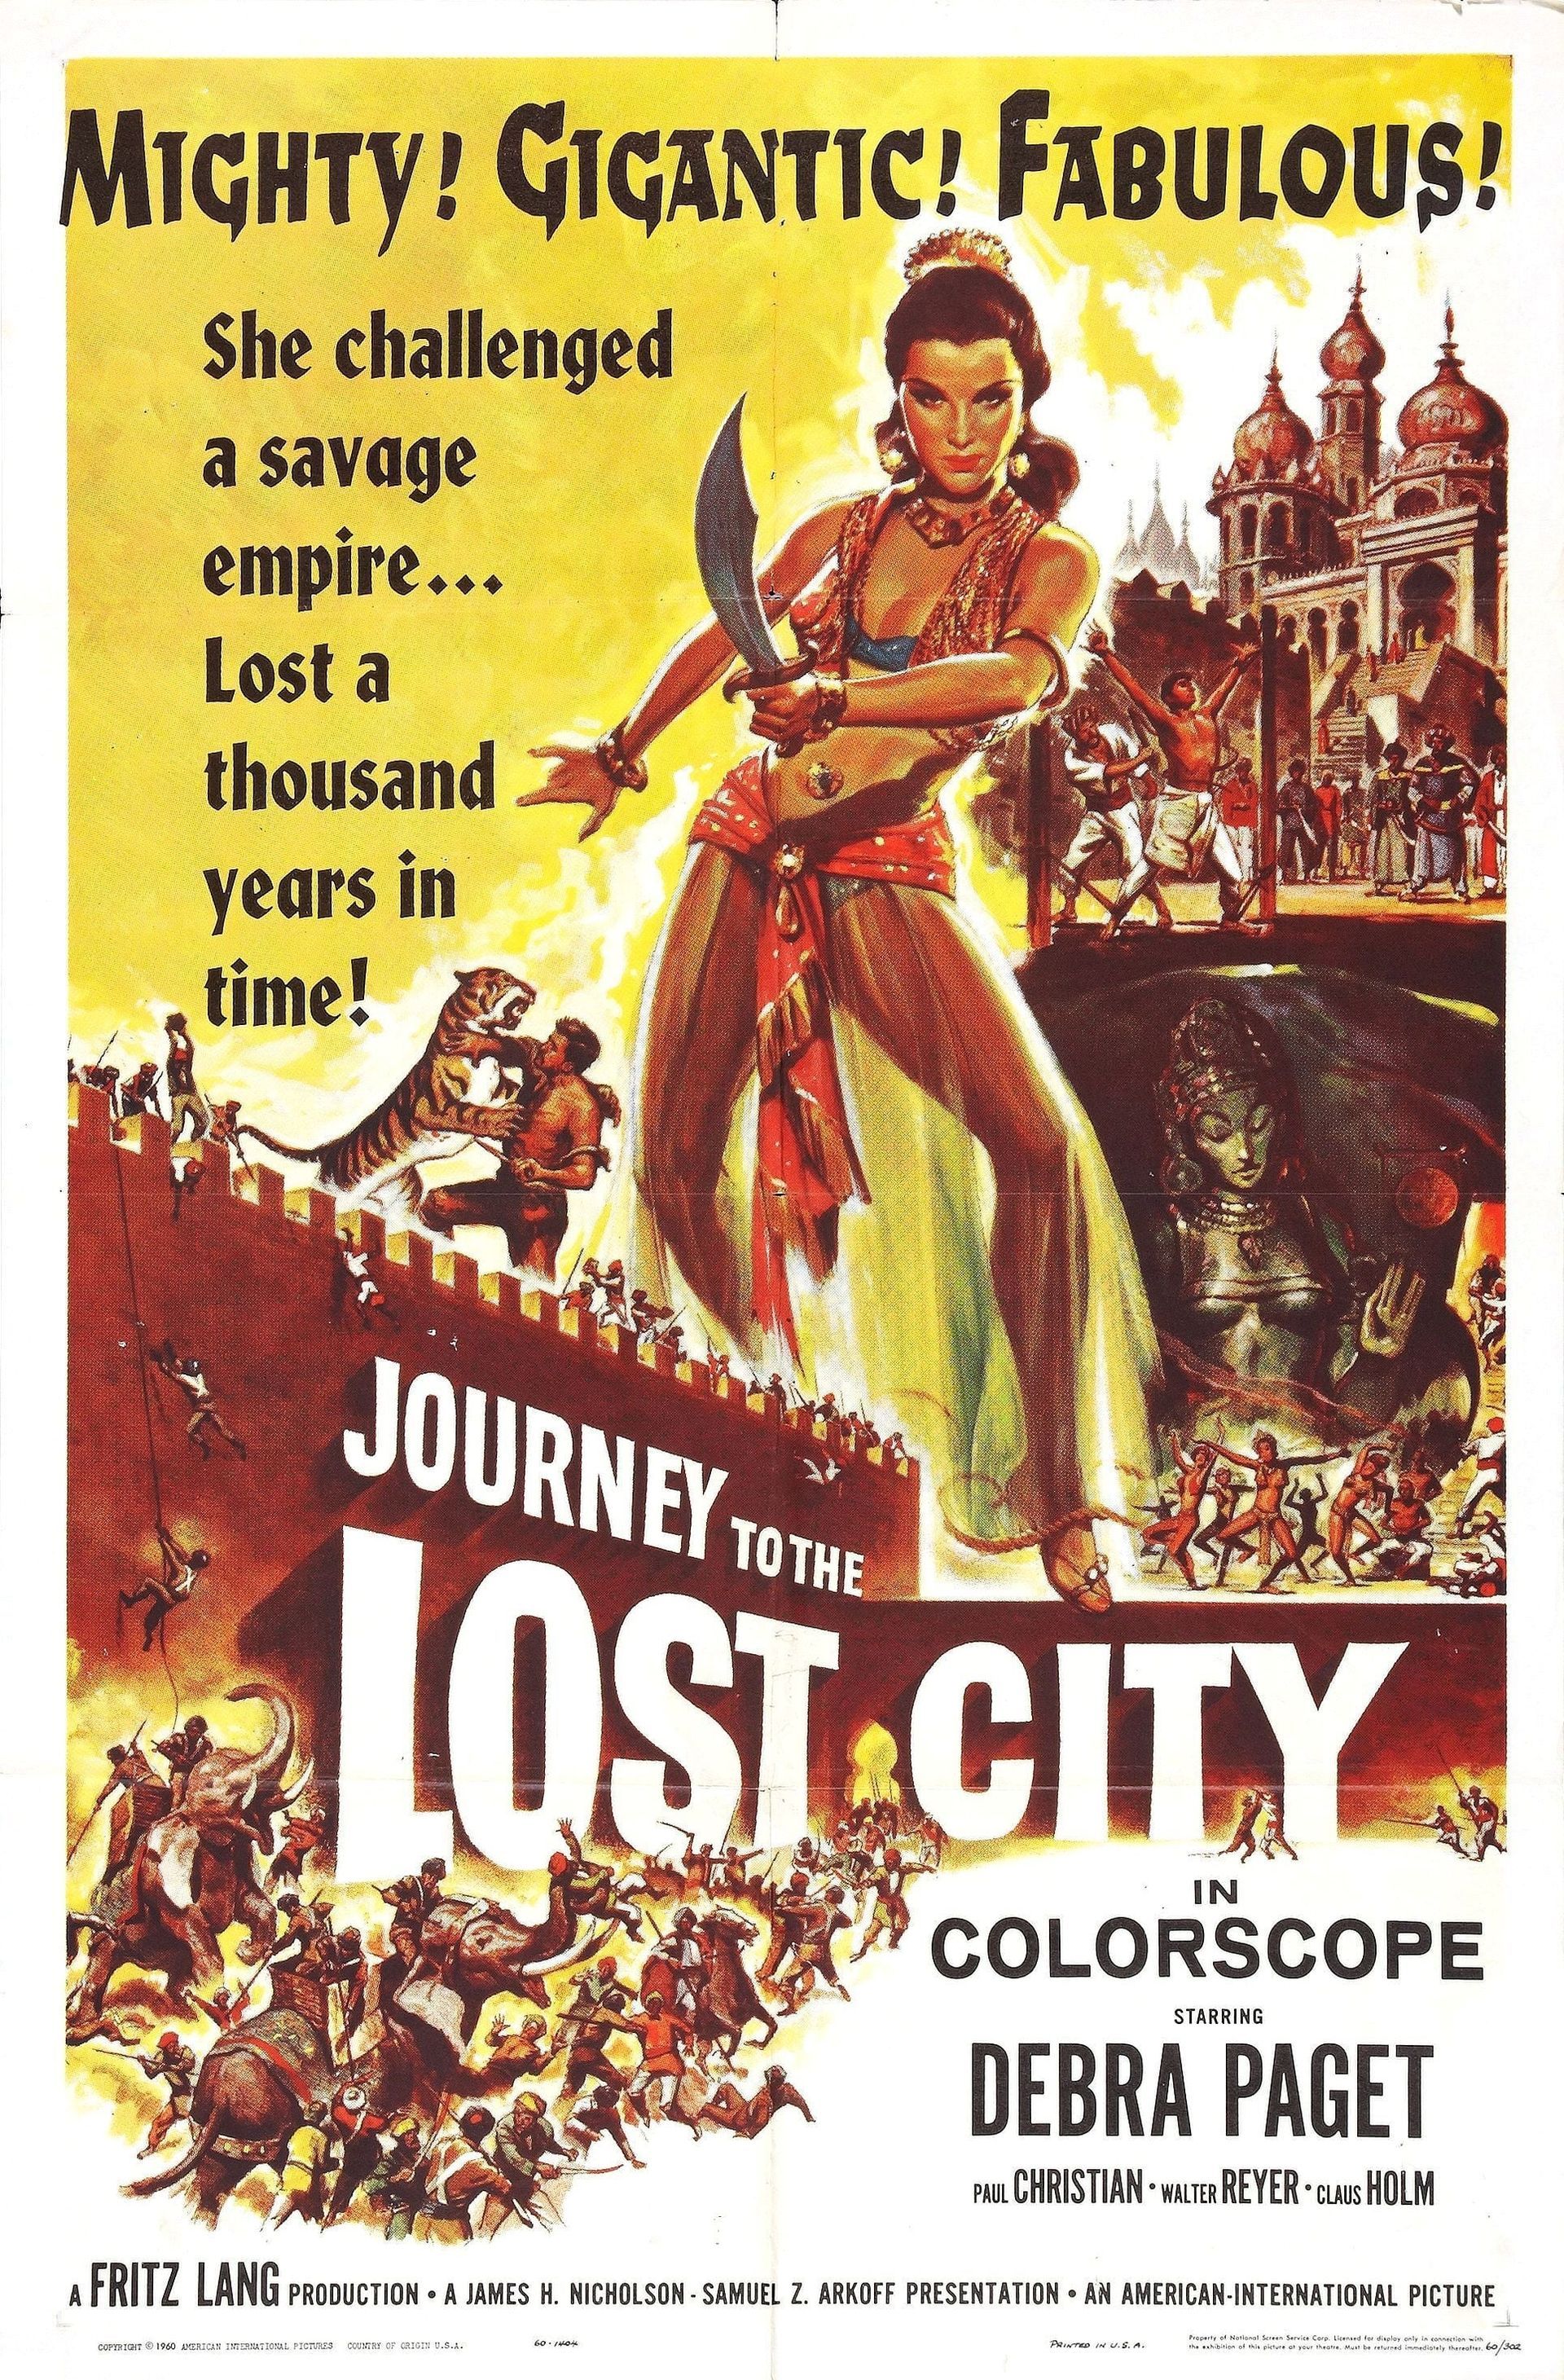 Watch The Lost City